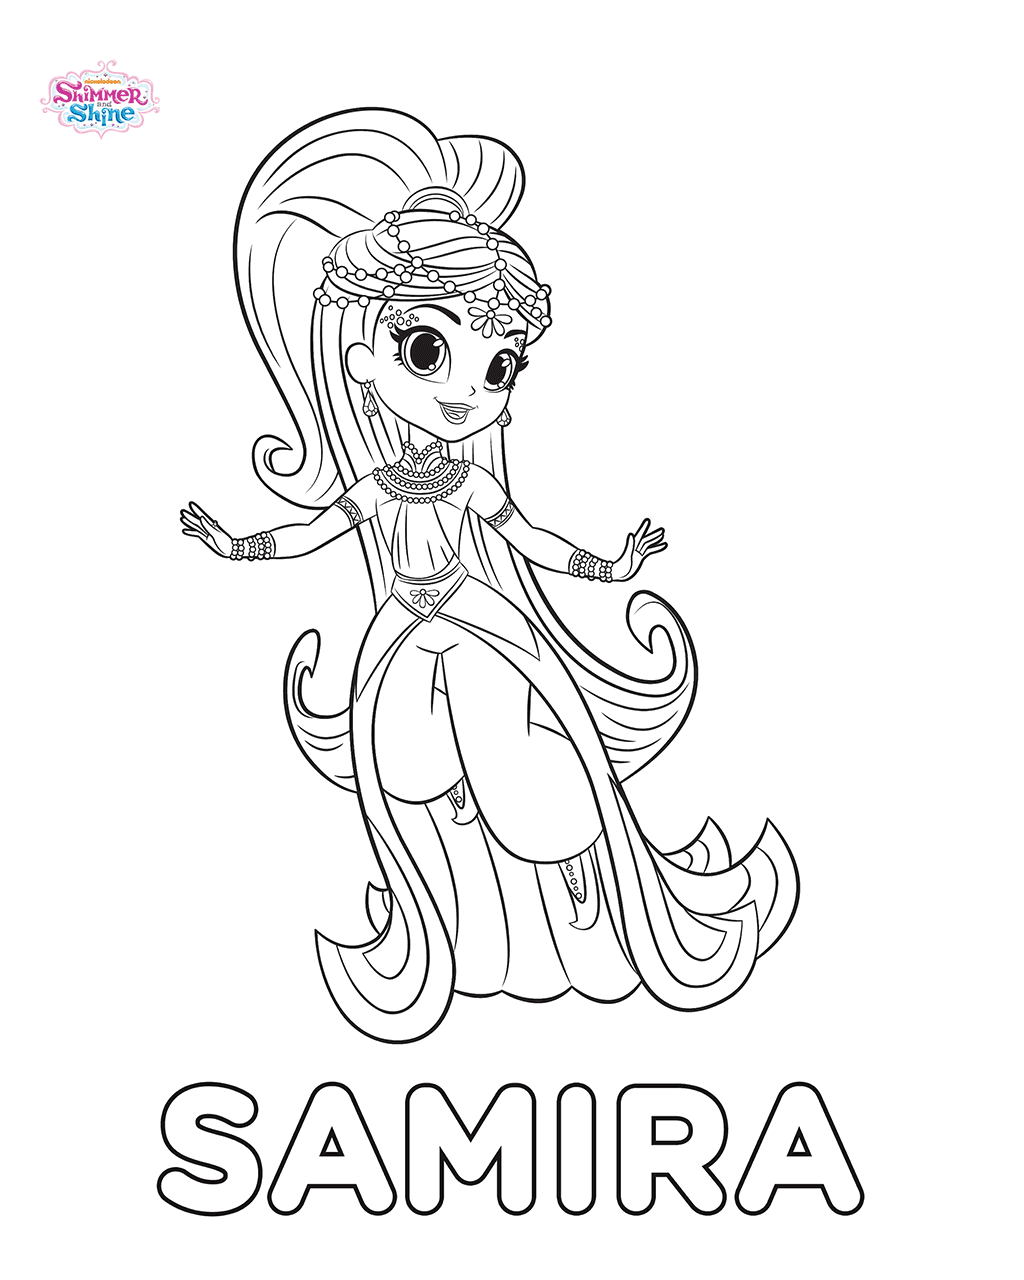 Samira Shimmer and Shine Coloring Pages